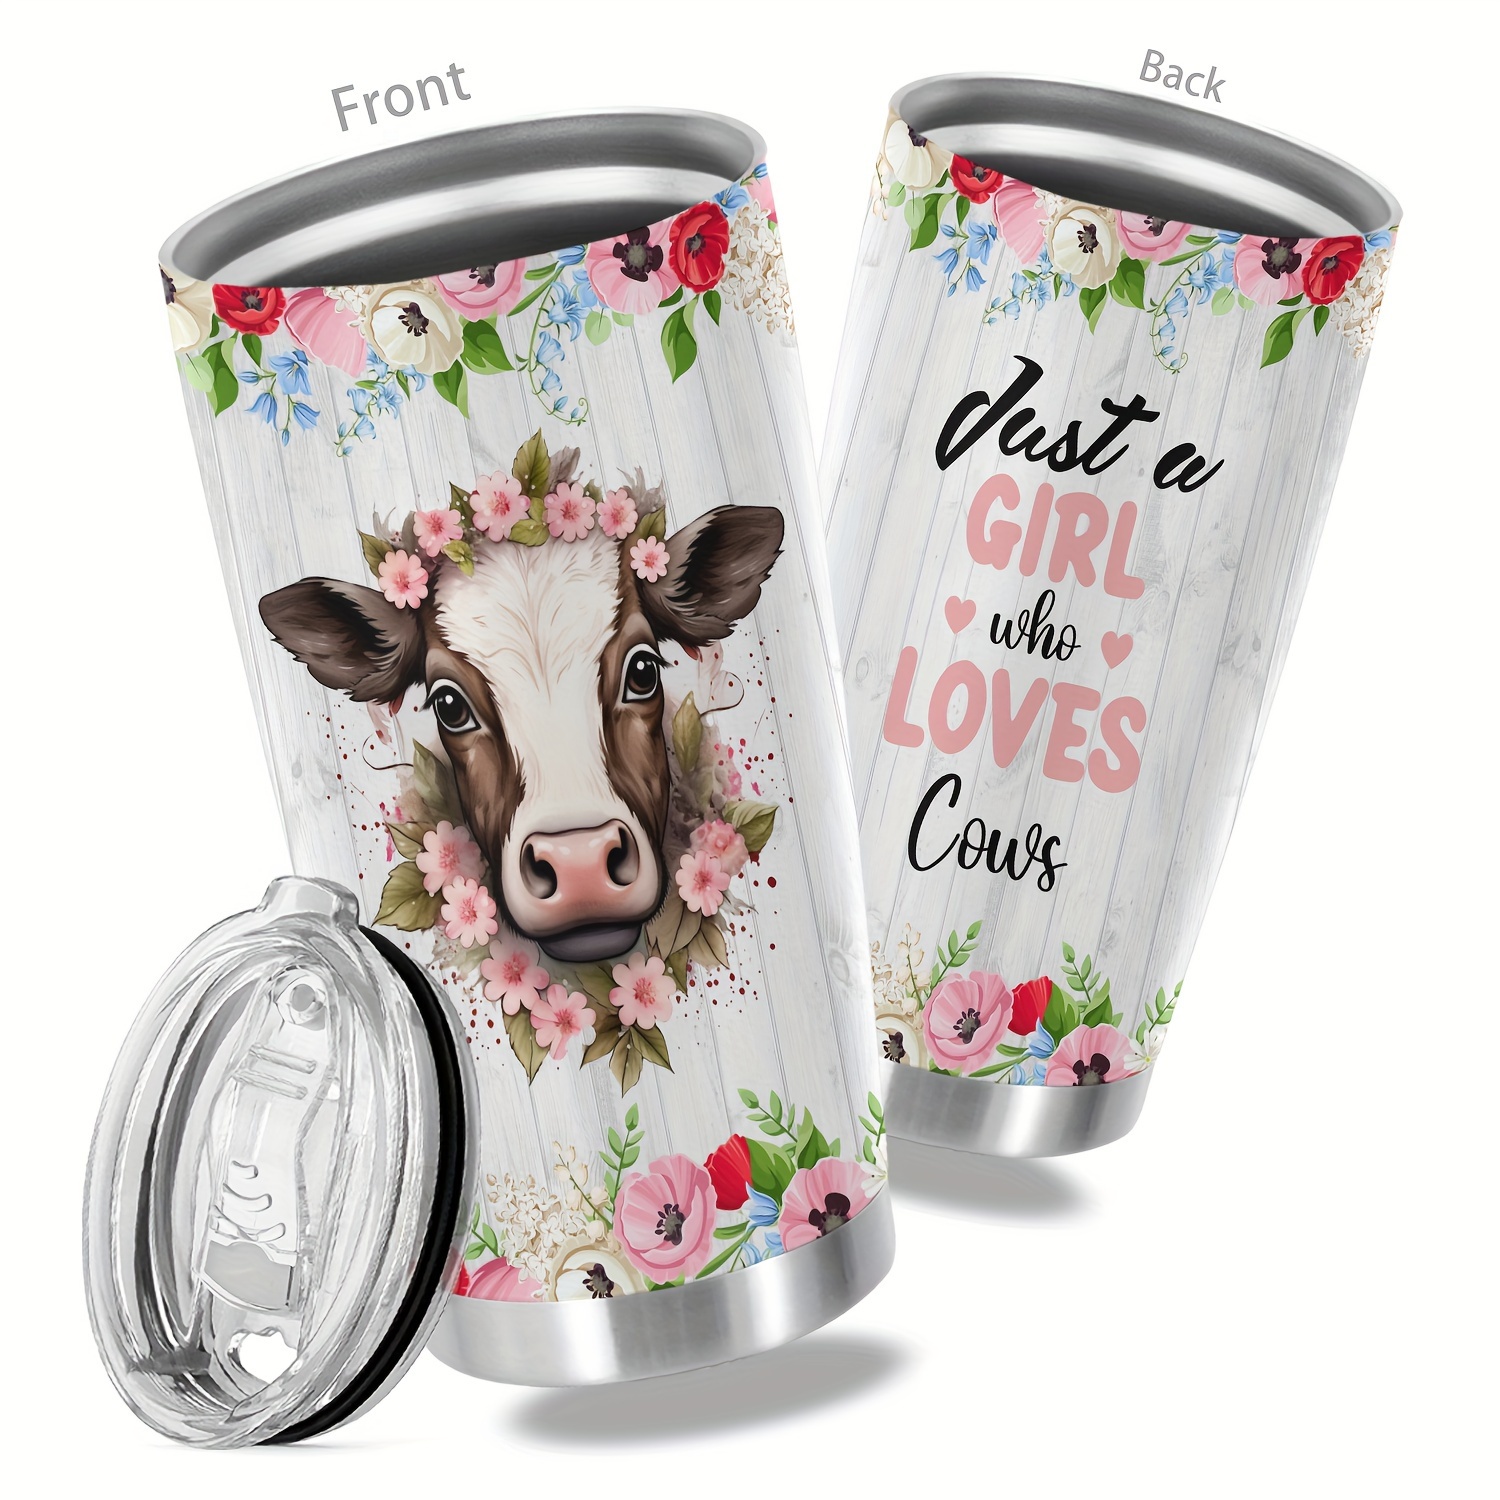 

1pc, 20oz Cup Stainless Steel Tumbler, Just A Girl Who Loves Cows Print Double Wall Vacuum Insulated Travel Mug, Gifts For Parents, Relatives And Friends